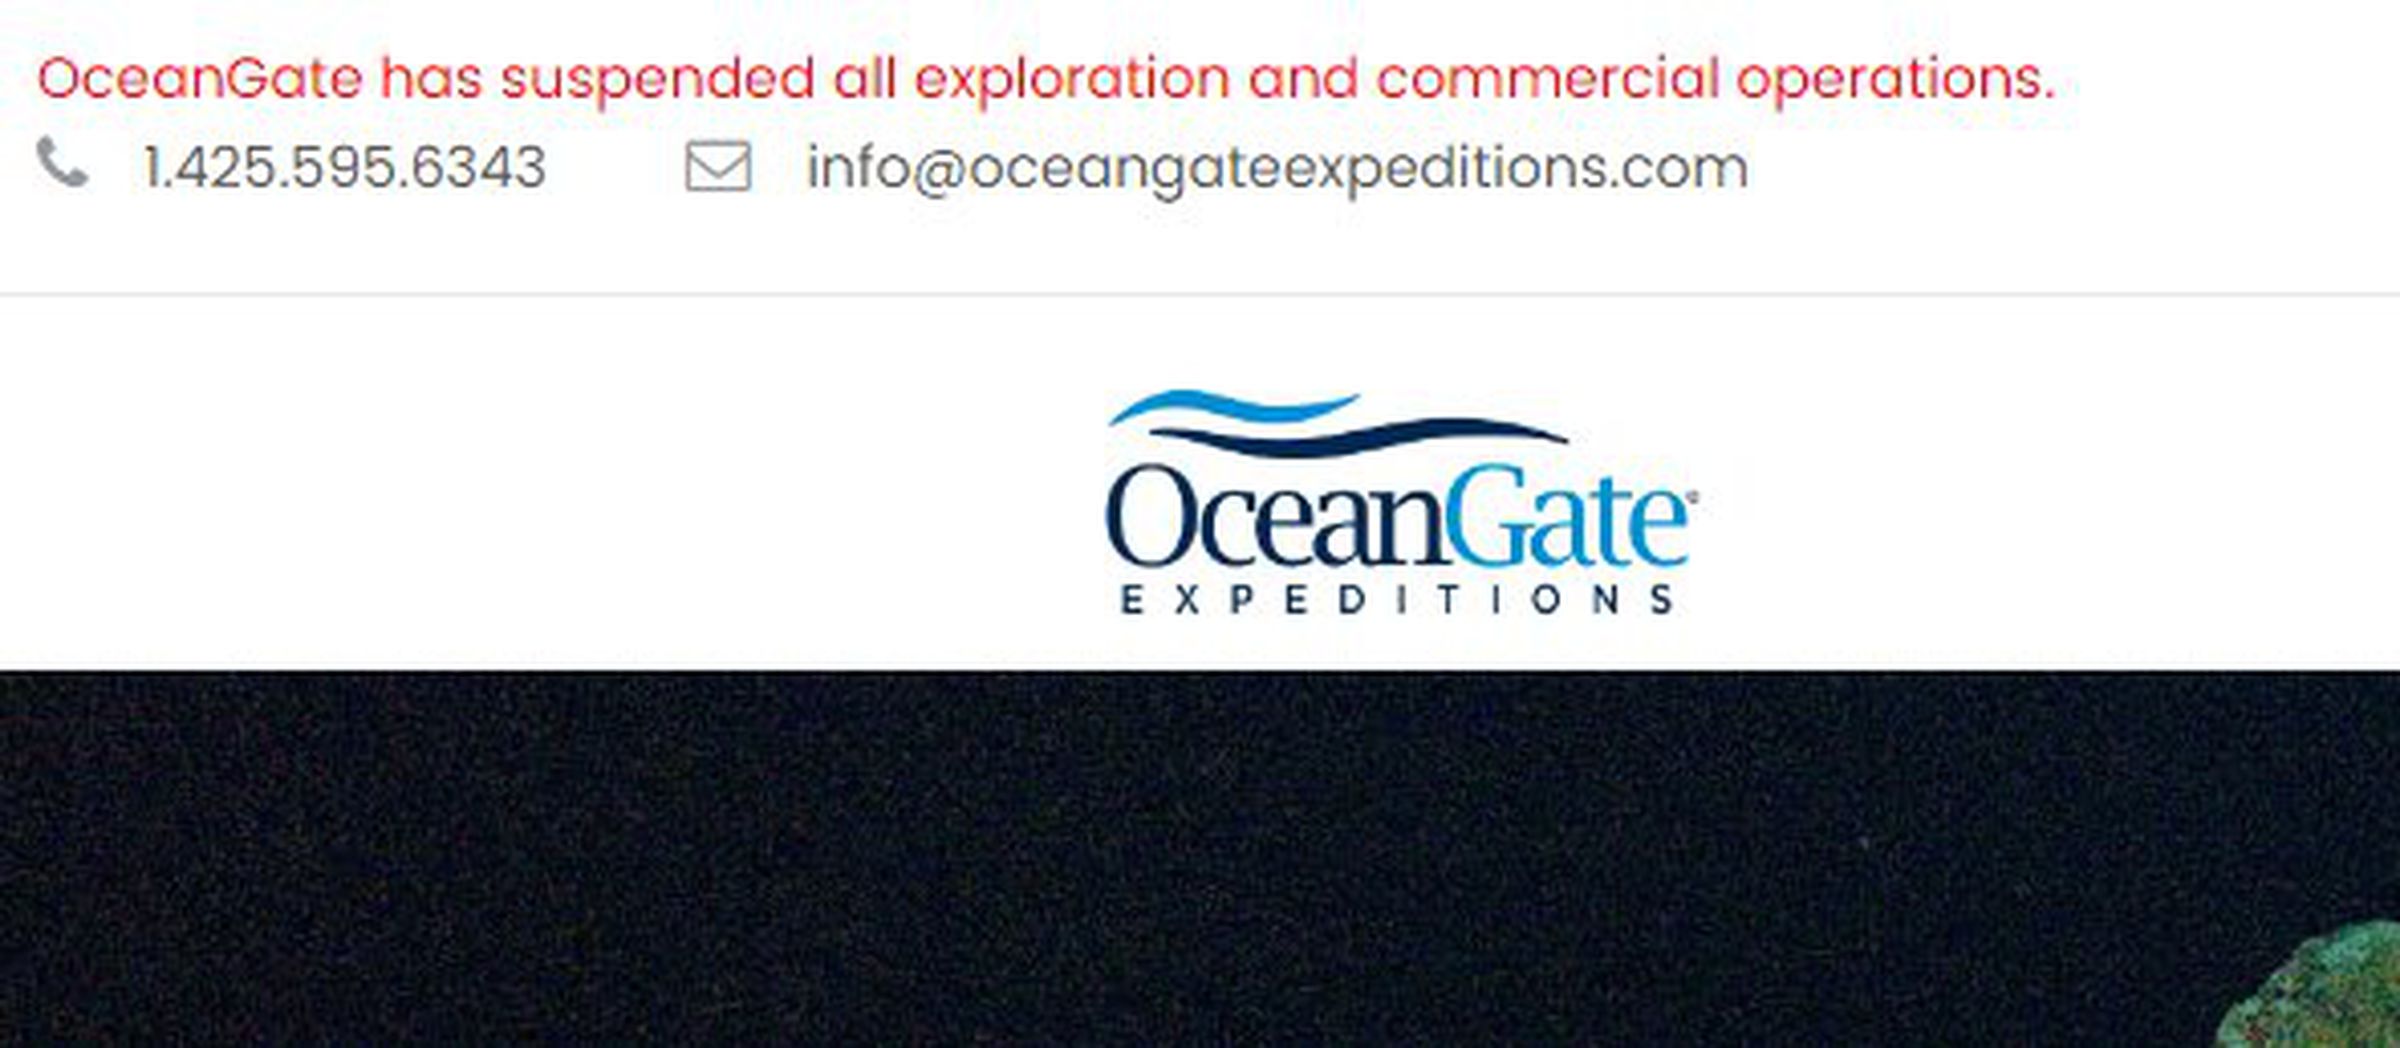 “OceanGate has suspended all exploration and commercial operations.”